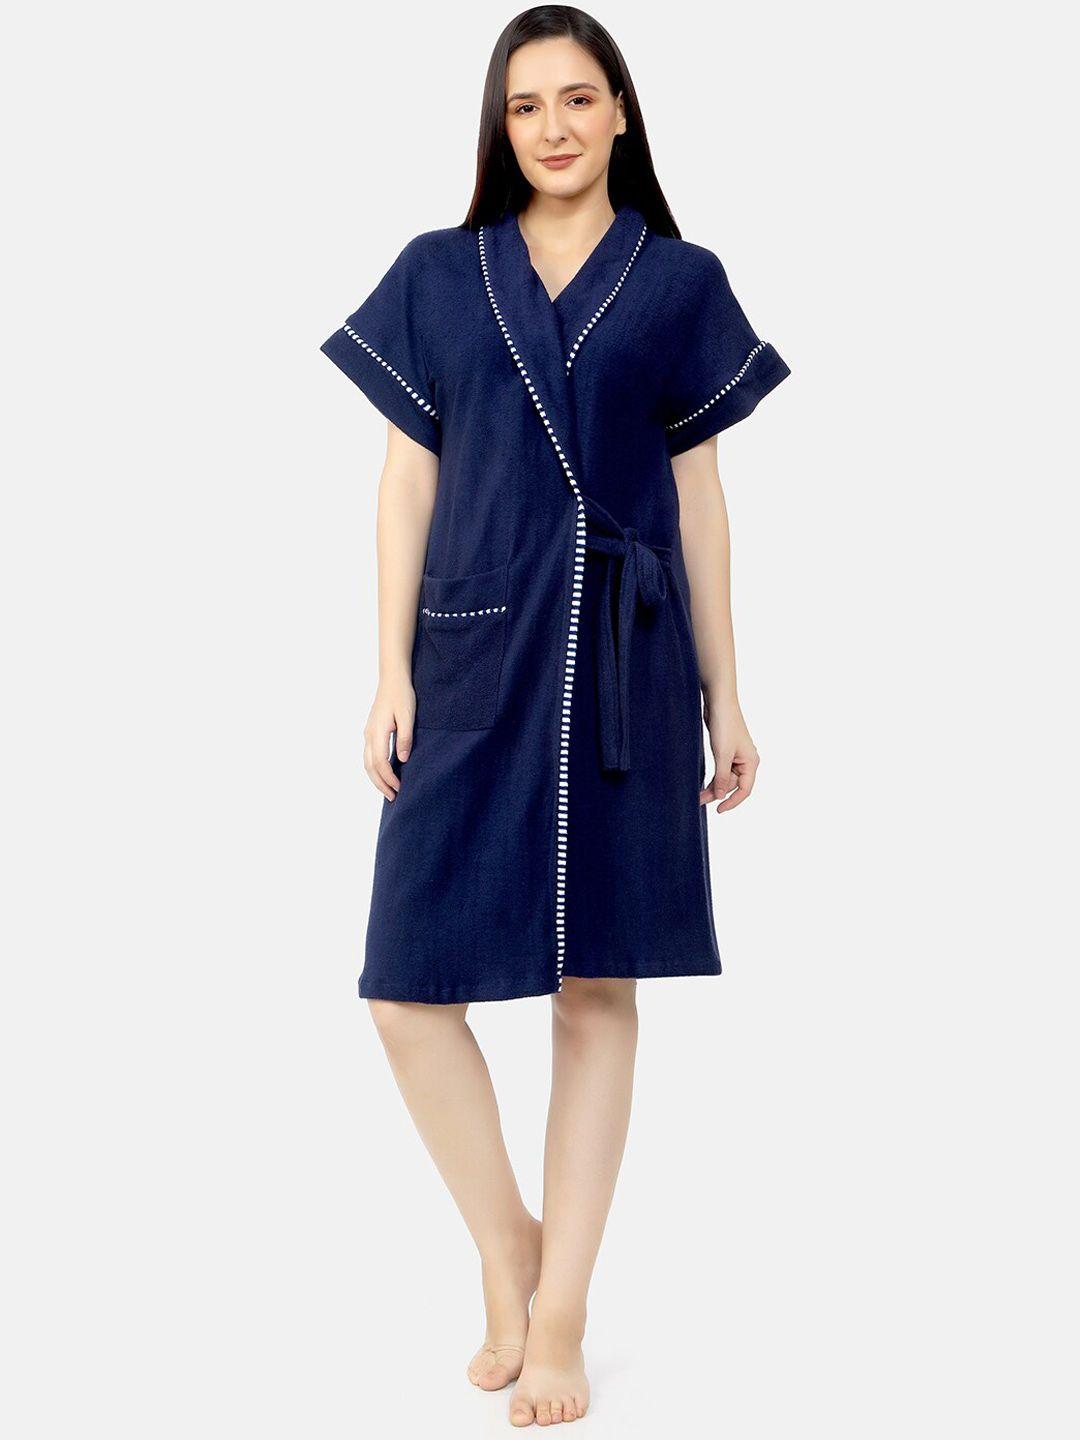 sand-dune-women-navy-blue-solid-pure-terry-cotton-bath-robe